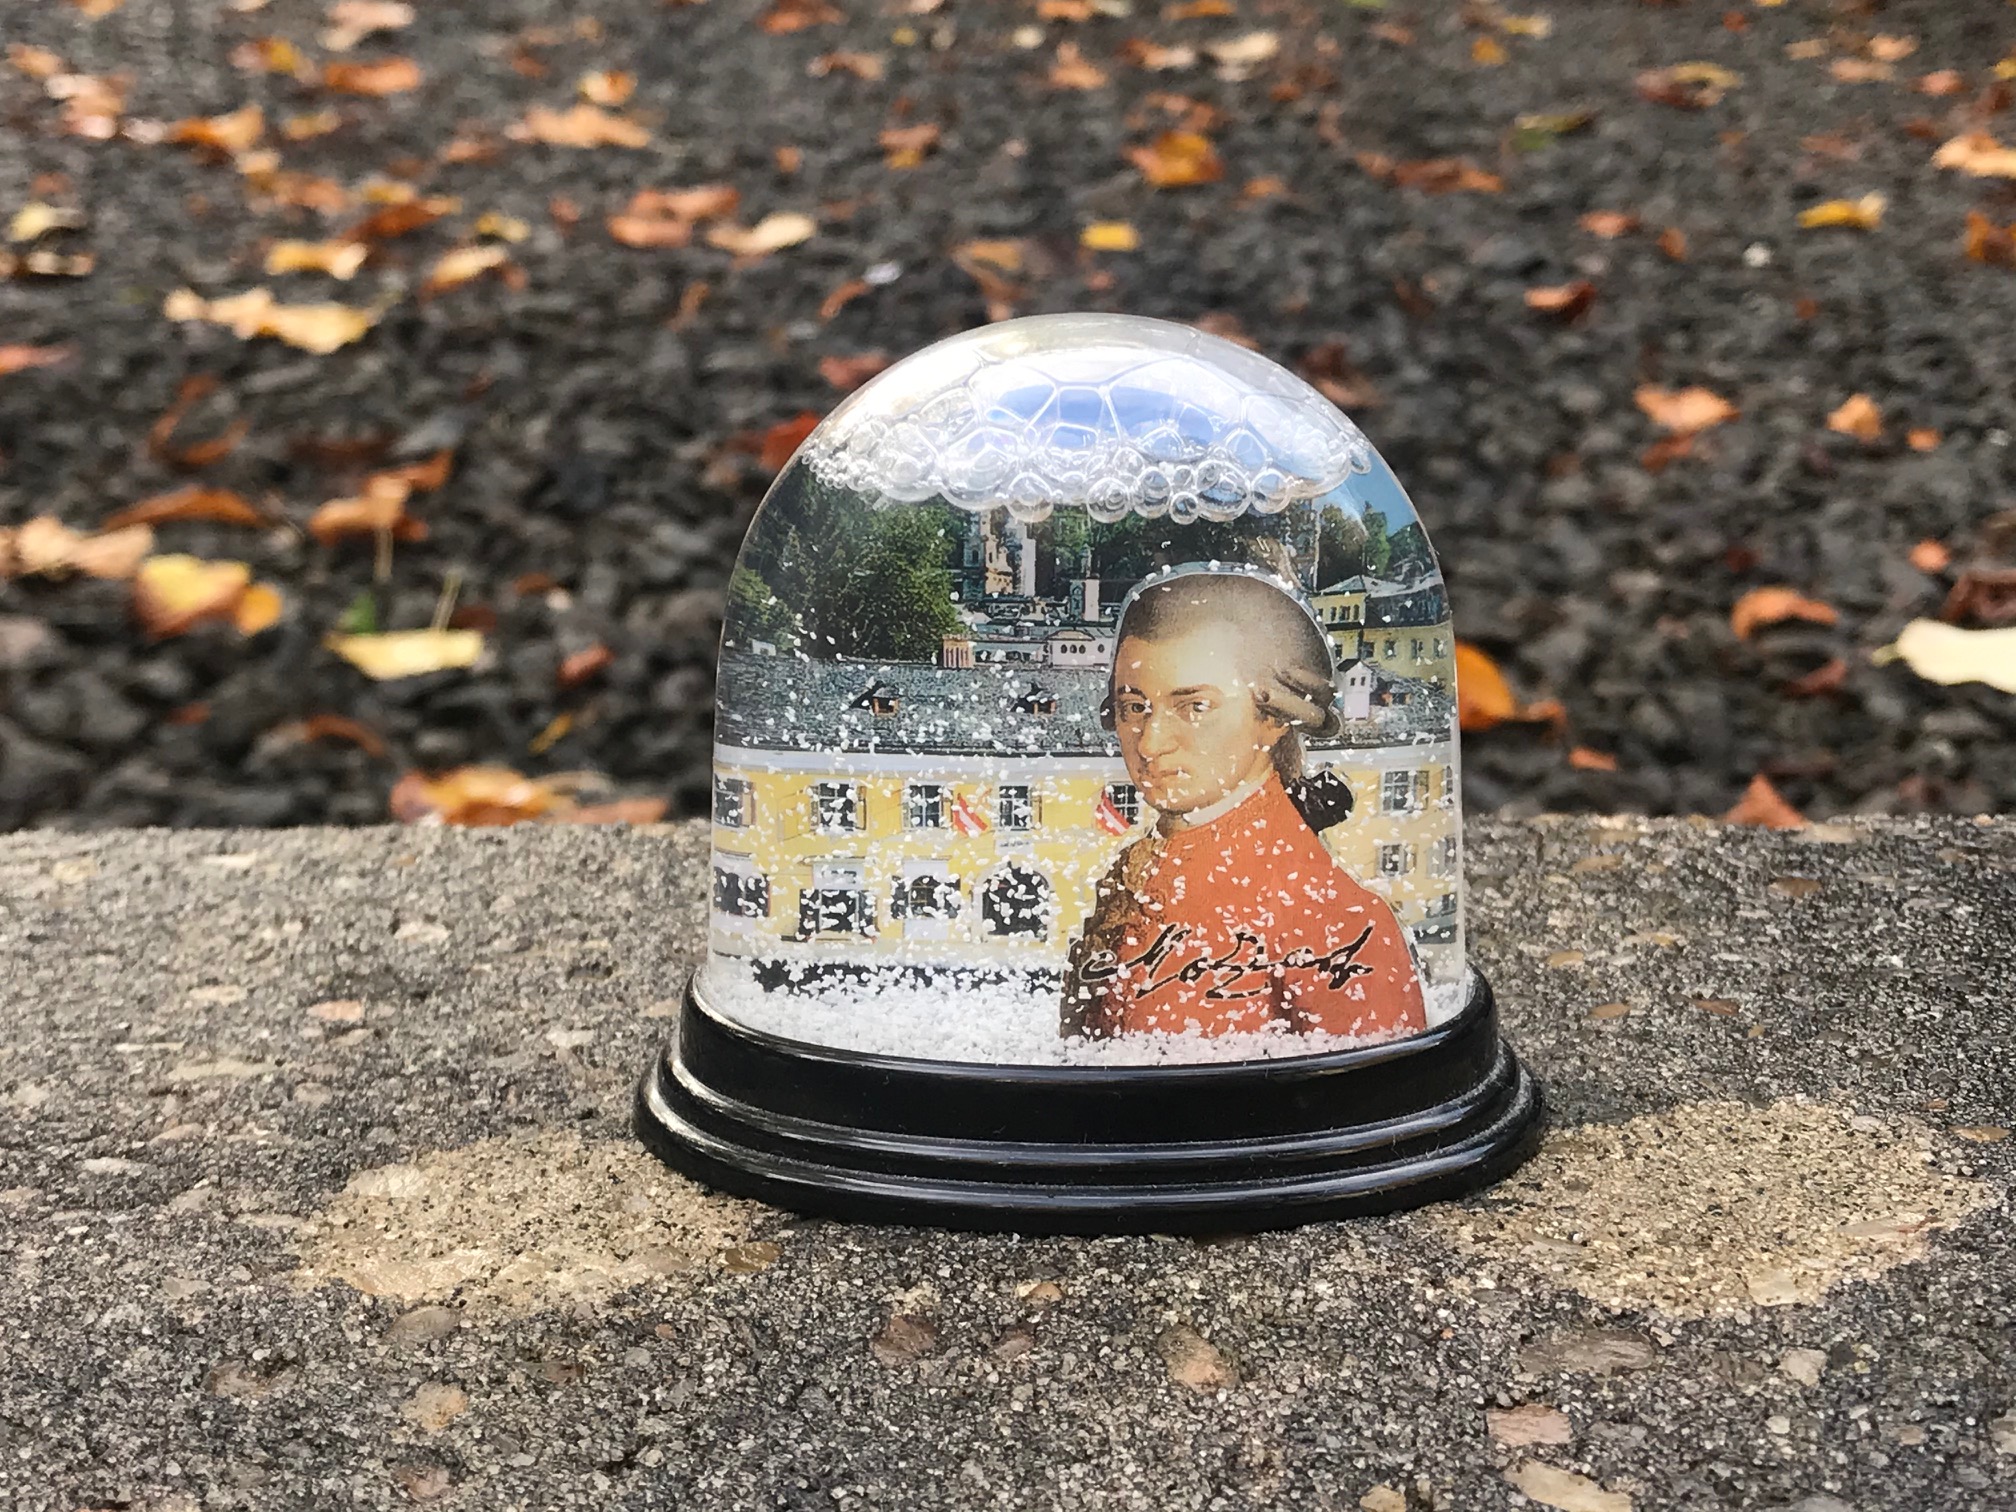 Salzburg Snow Globe from a Collection of Snow Globes